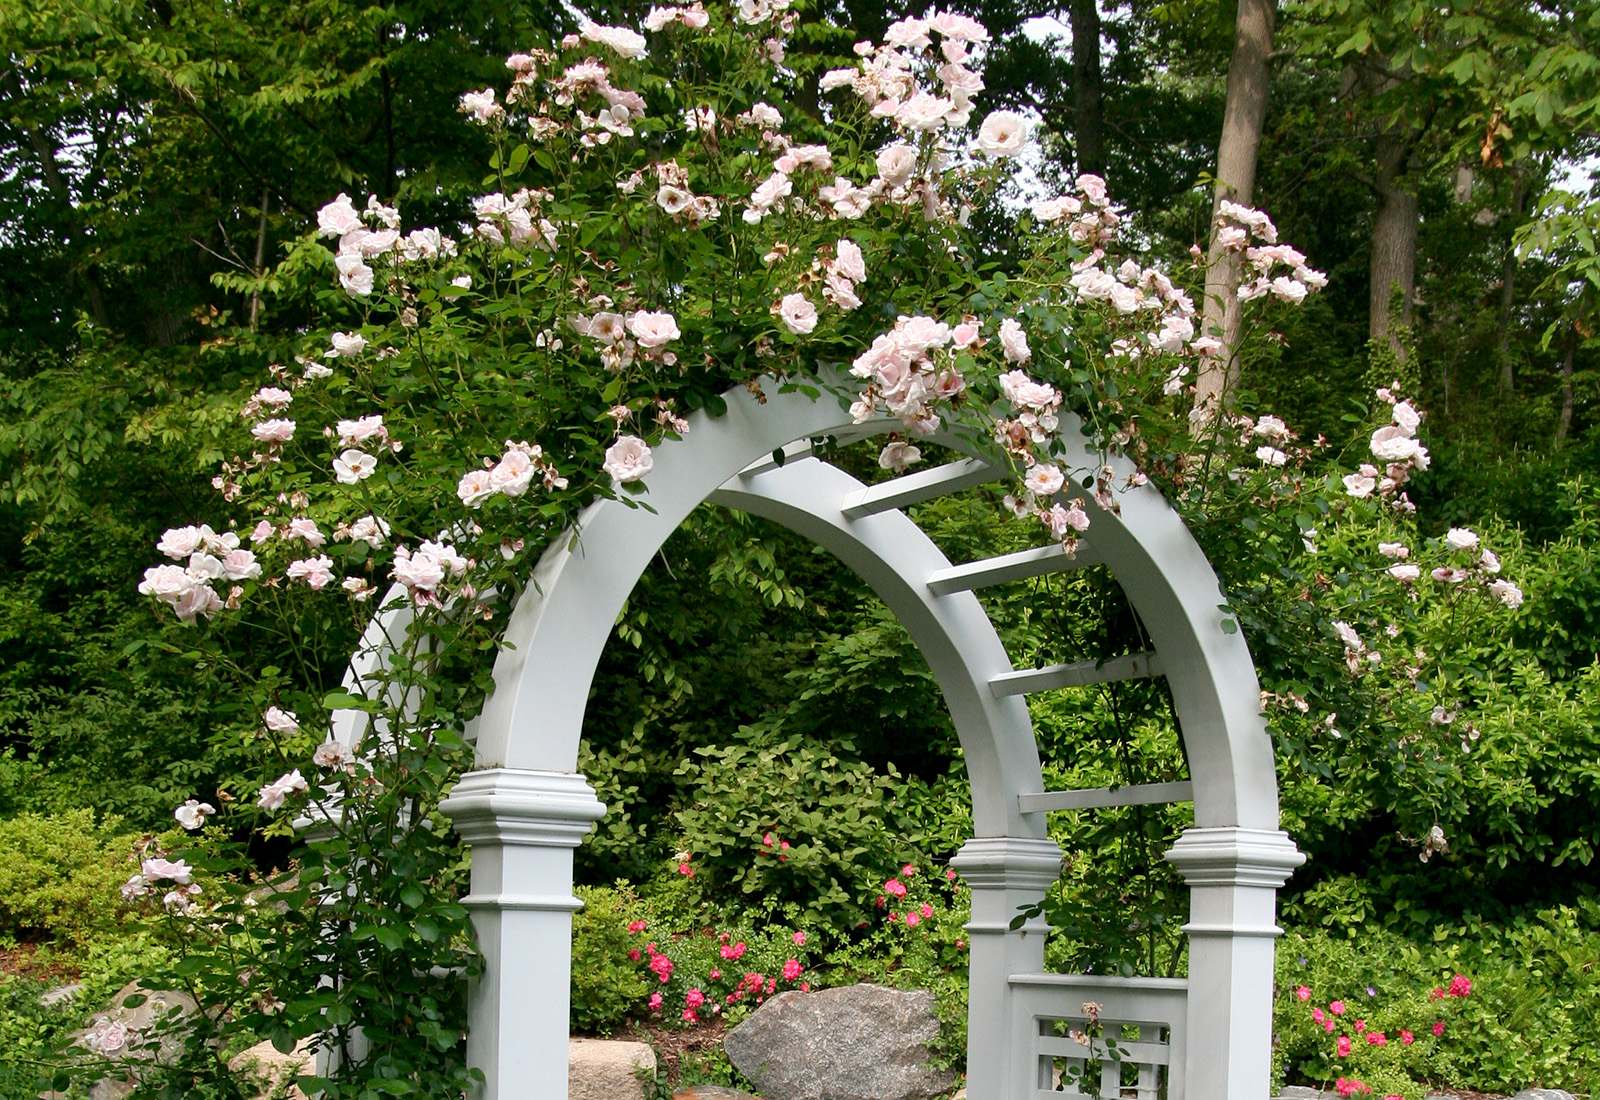 Decorative arbor with picket fence and bluestone walkway.